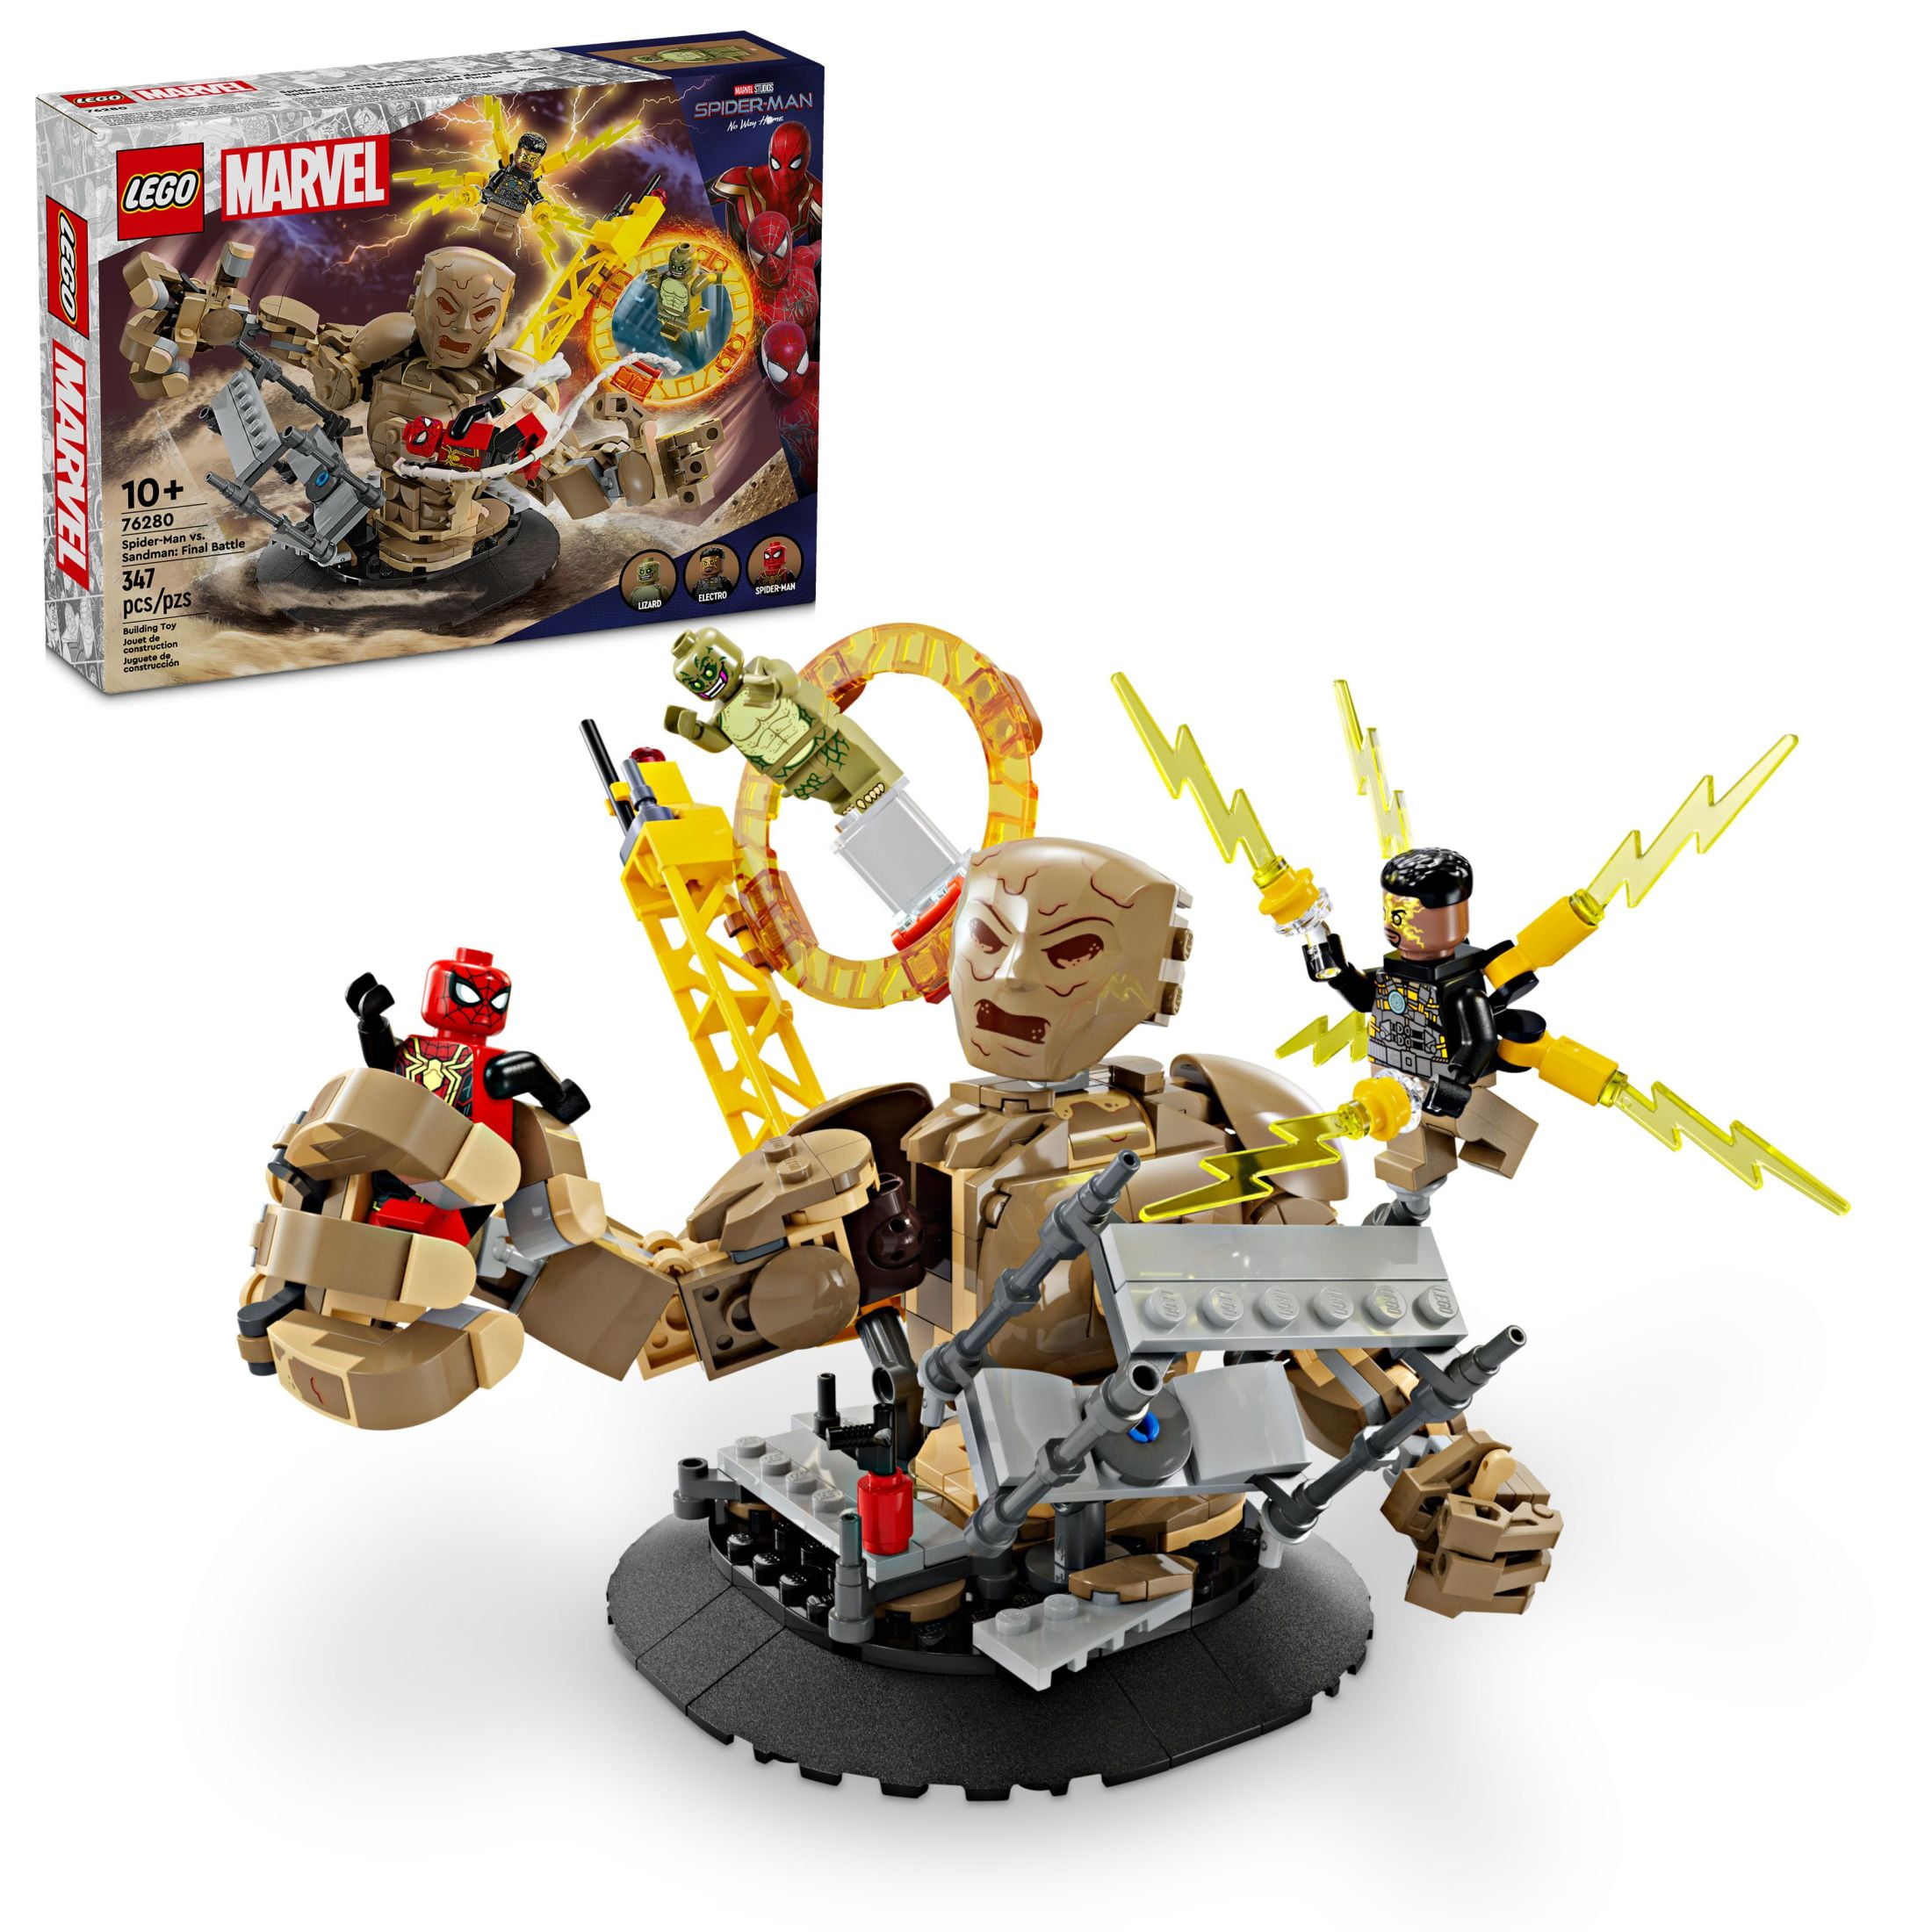  LEGO Marvel Spider-Man Spider-Jet vs Venom Mech 76150 Superhero  Gift for Kids with Minifigures, Mech and Plane (371 Pieces) : Toys & Games